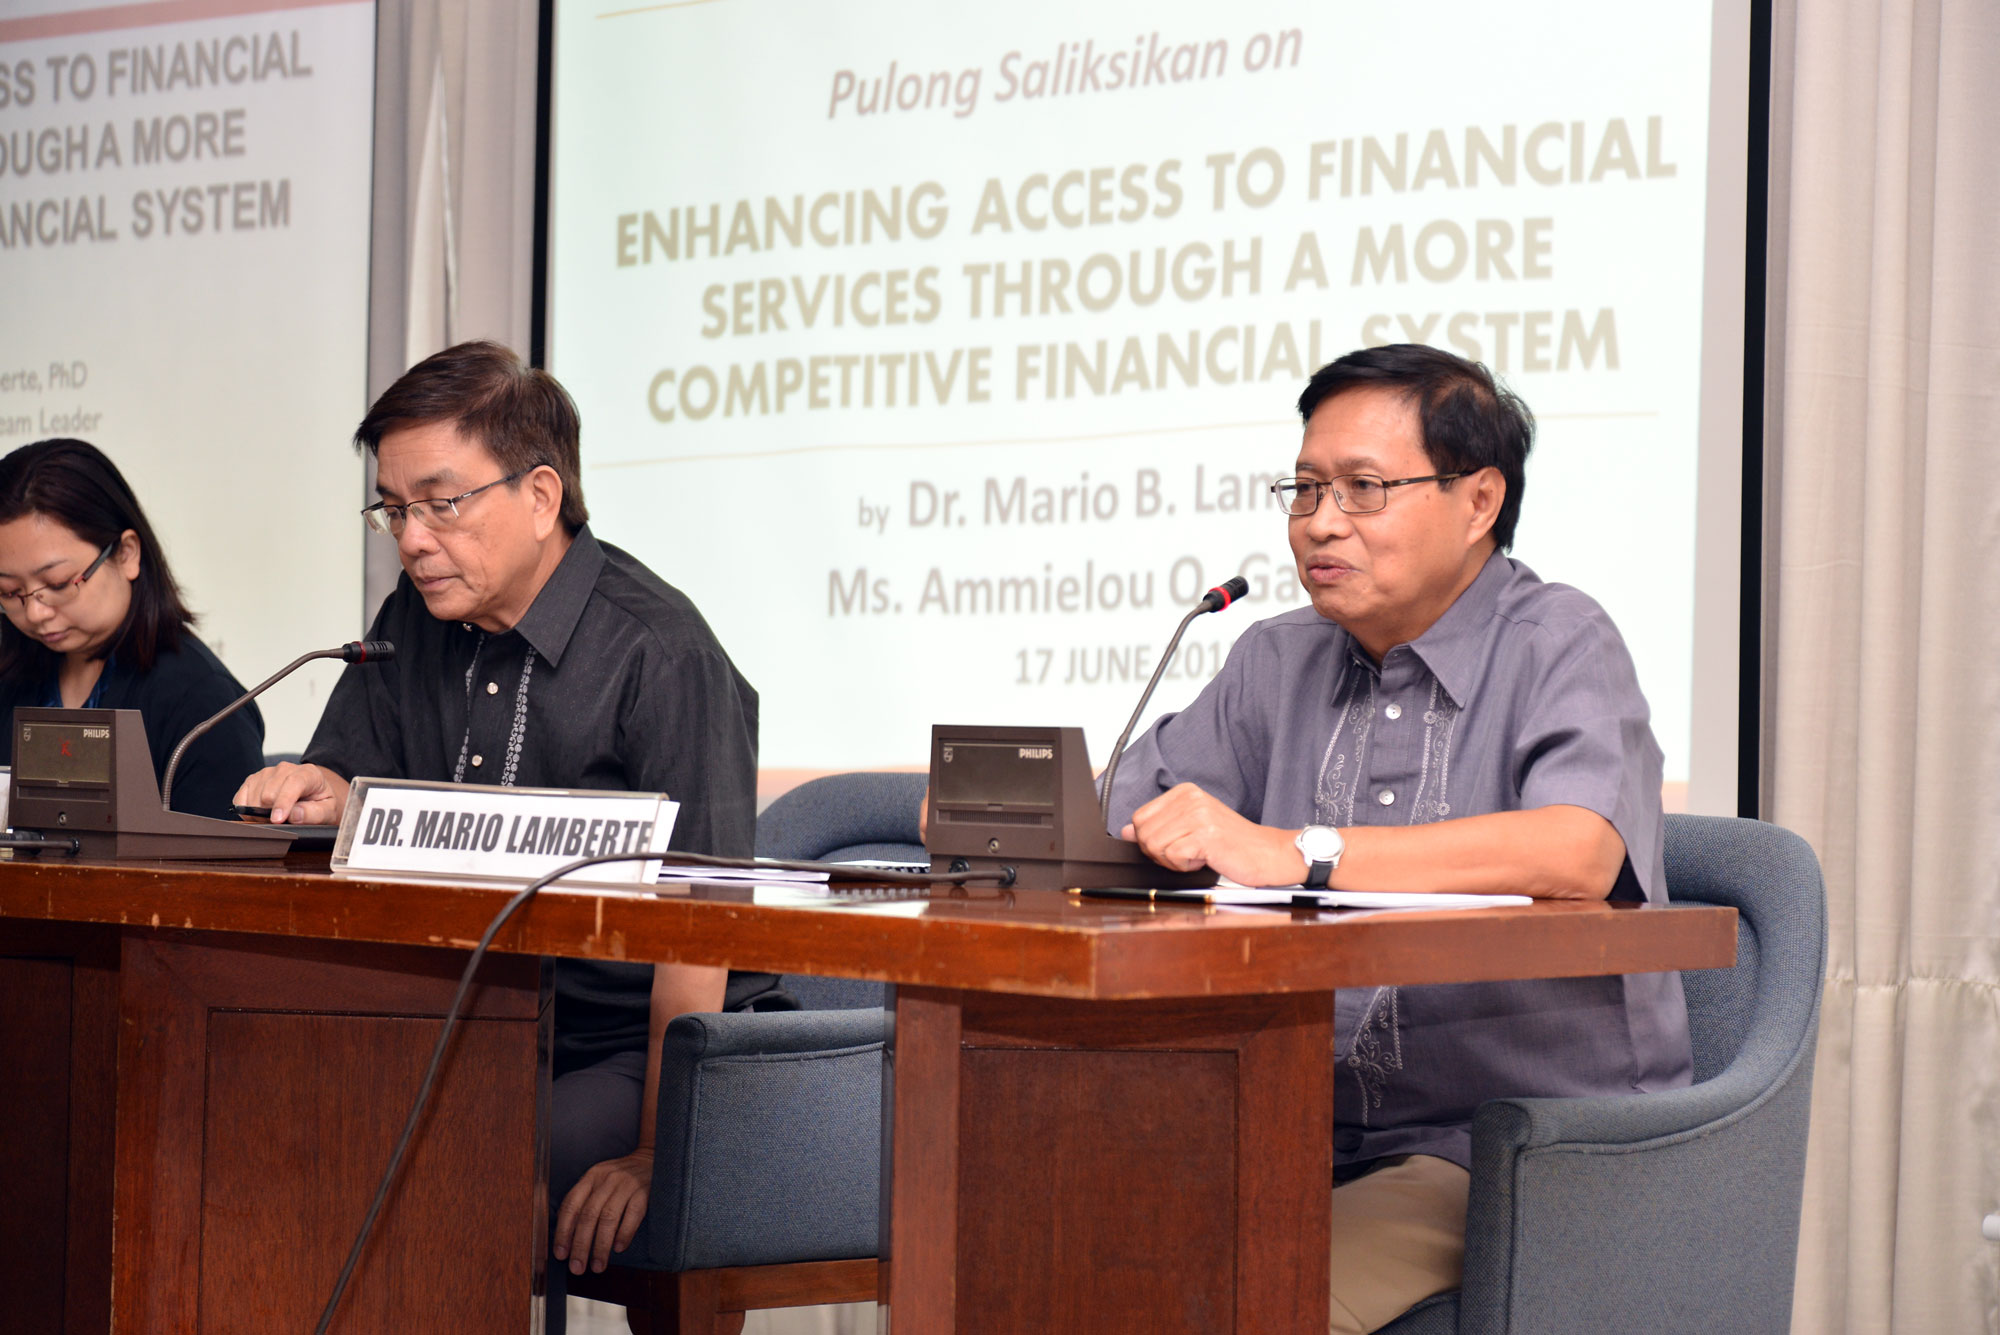 Pulong Saliksikan on Enhancing Access to Financial Services through a More Competitive Financial System-DSC_3549.jpg